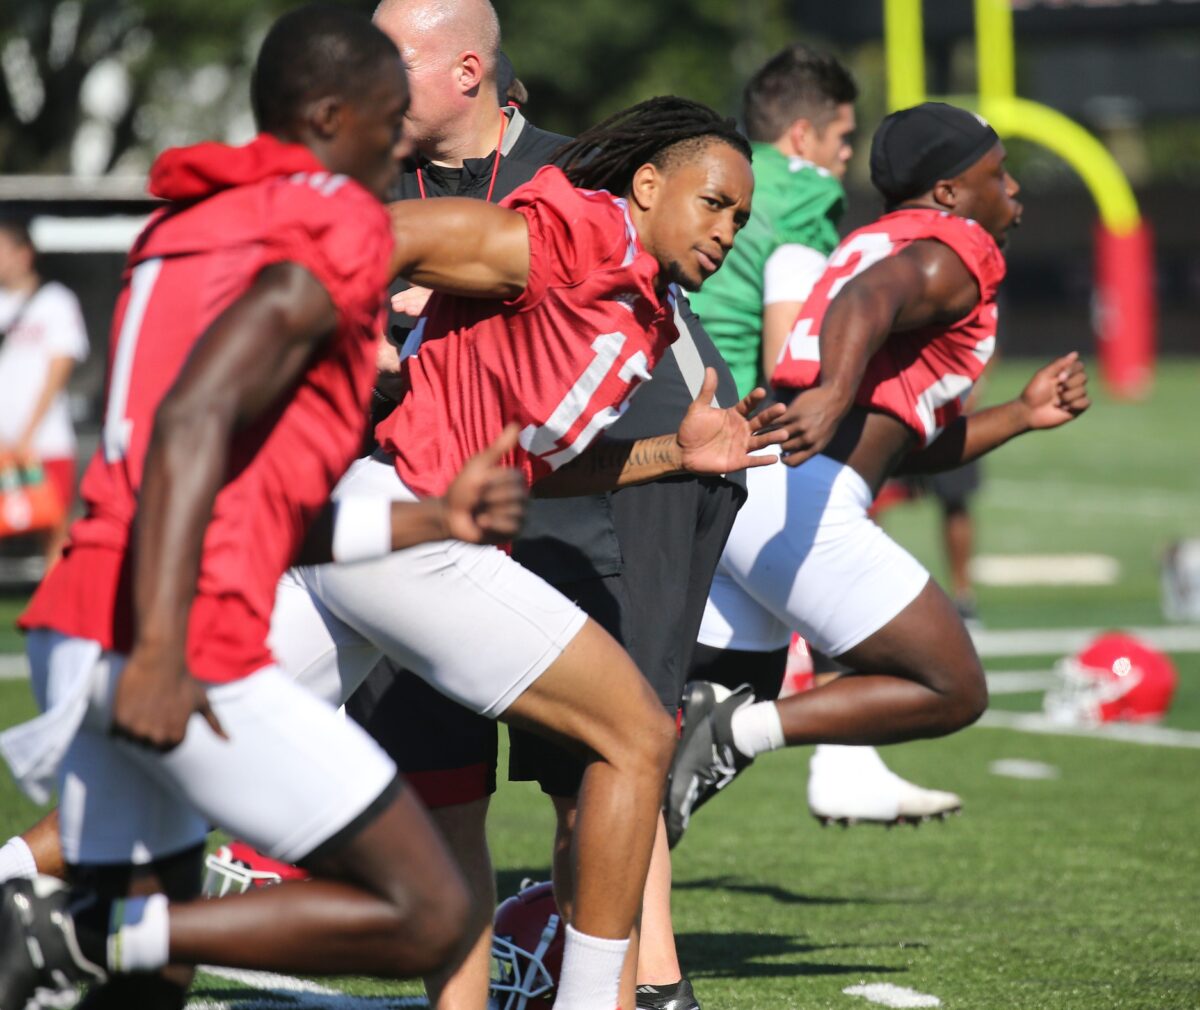 Josh Youngblood’s growing role with Rutgers football the byproduct of hard work